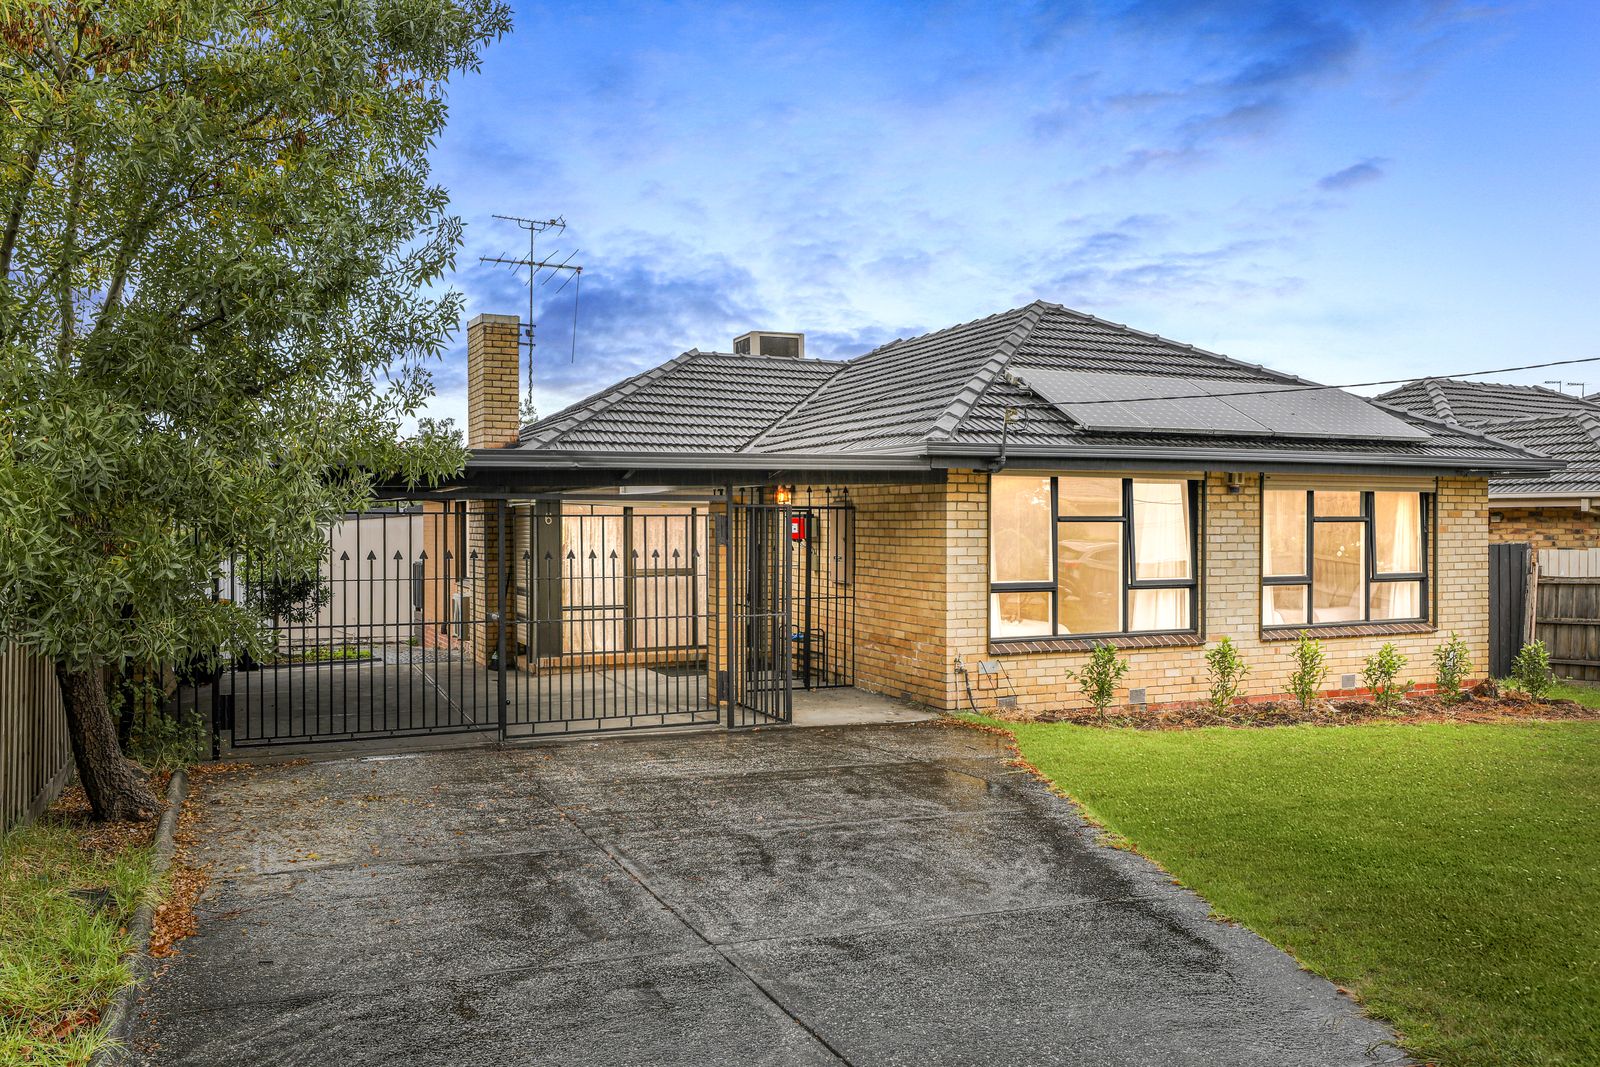 4 bedrooms House in 6 Lynne Street DONVALE VIC, 3111